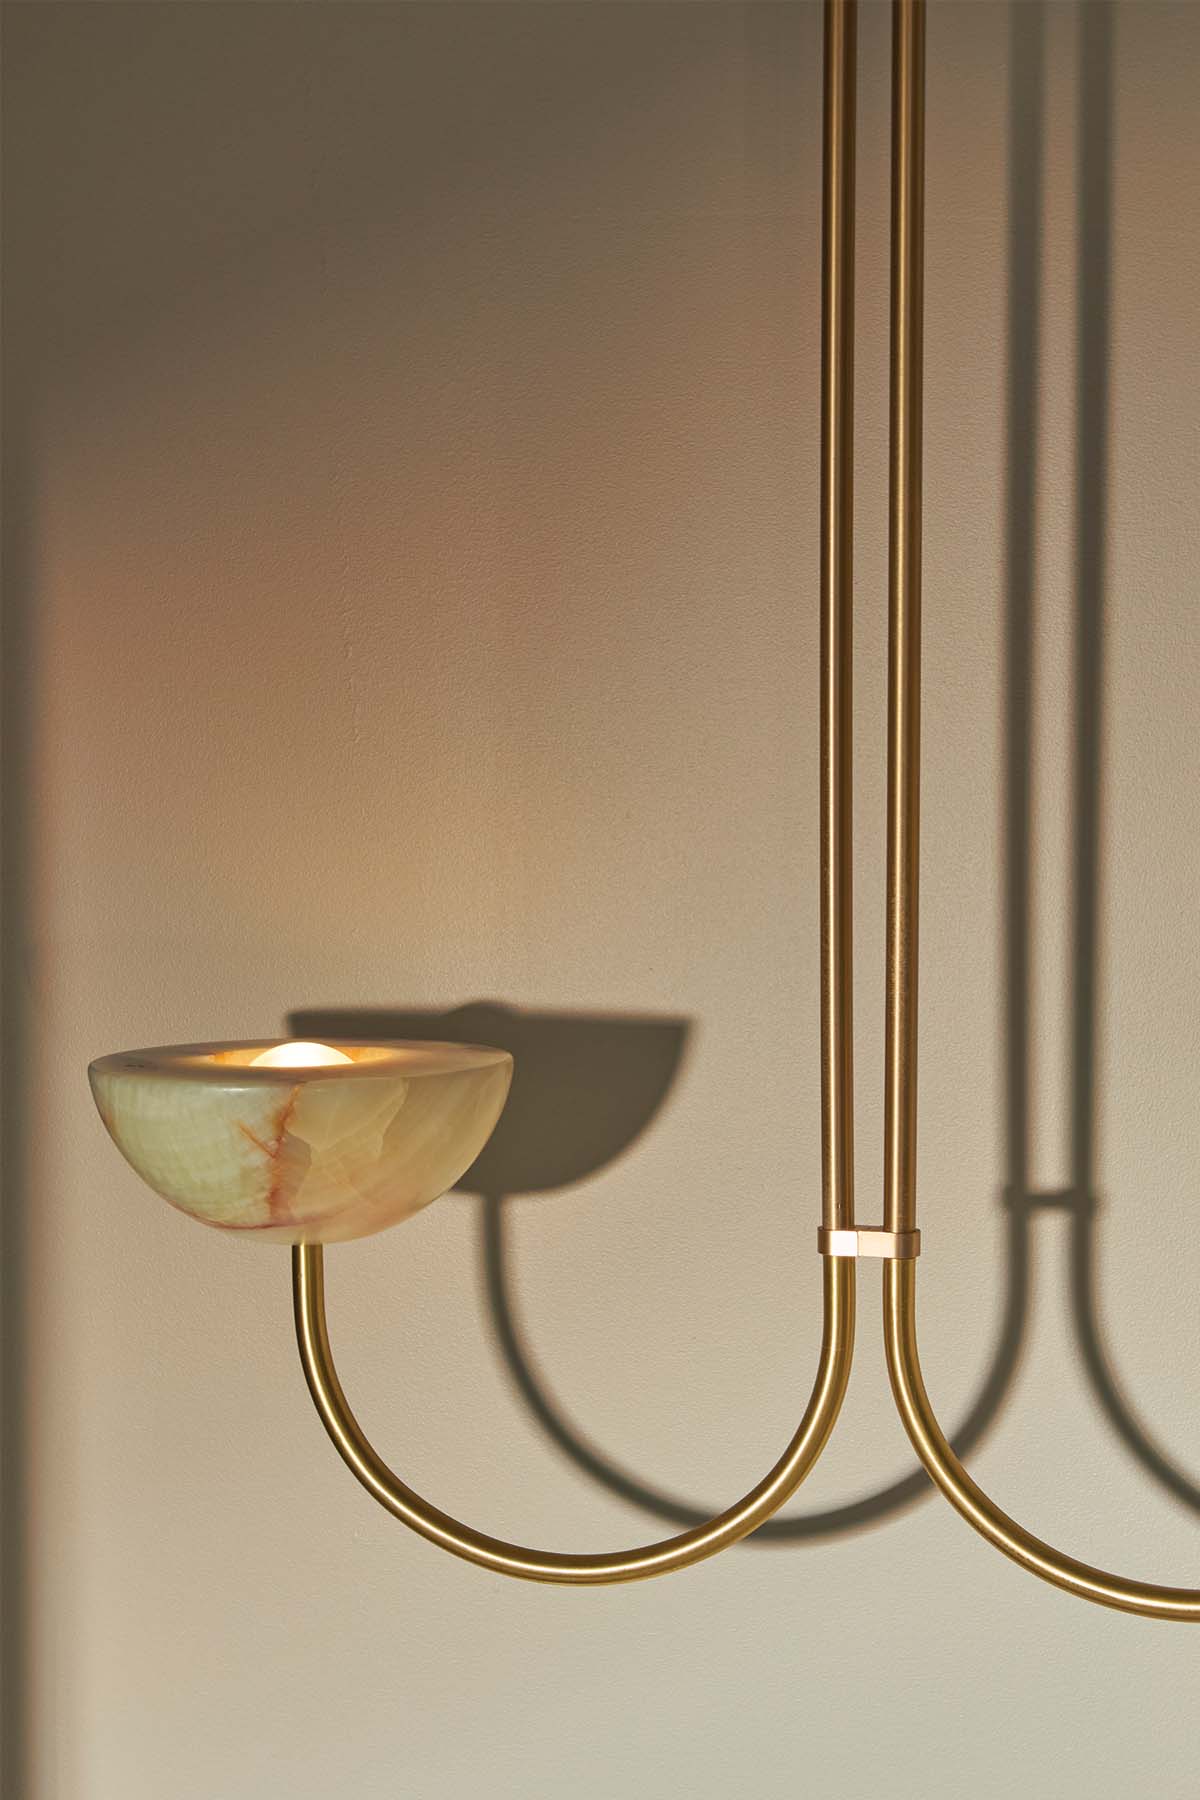 Aurelia Double Pendant, Jade Onyx and Brass. Image by Lawrence Furzey